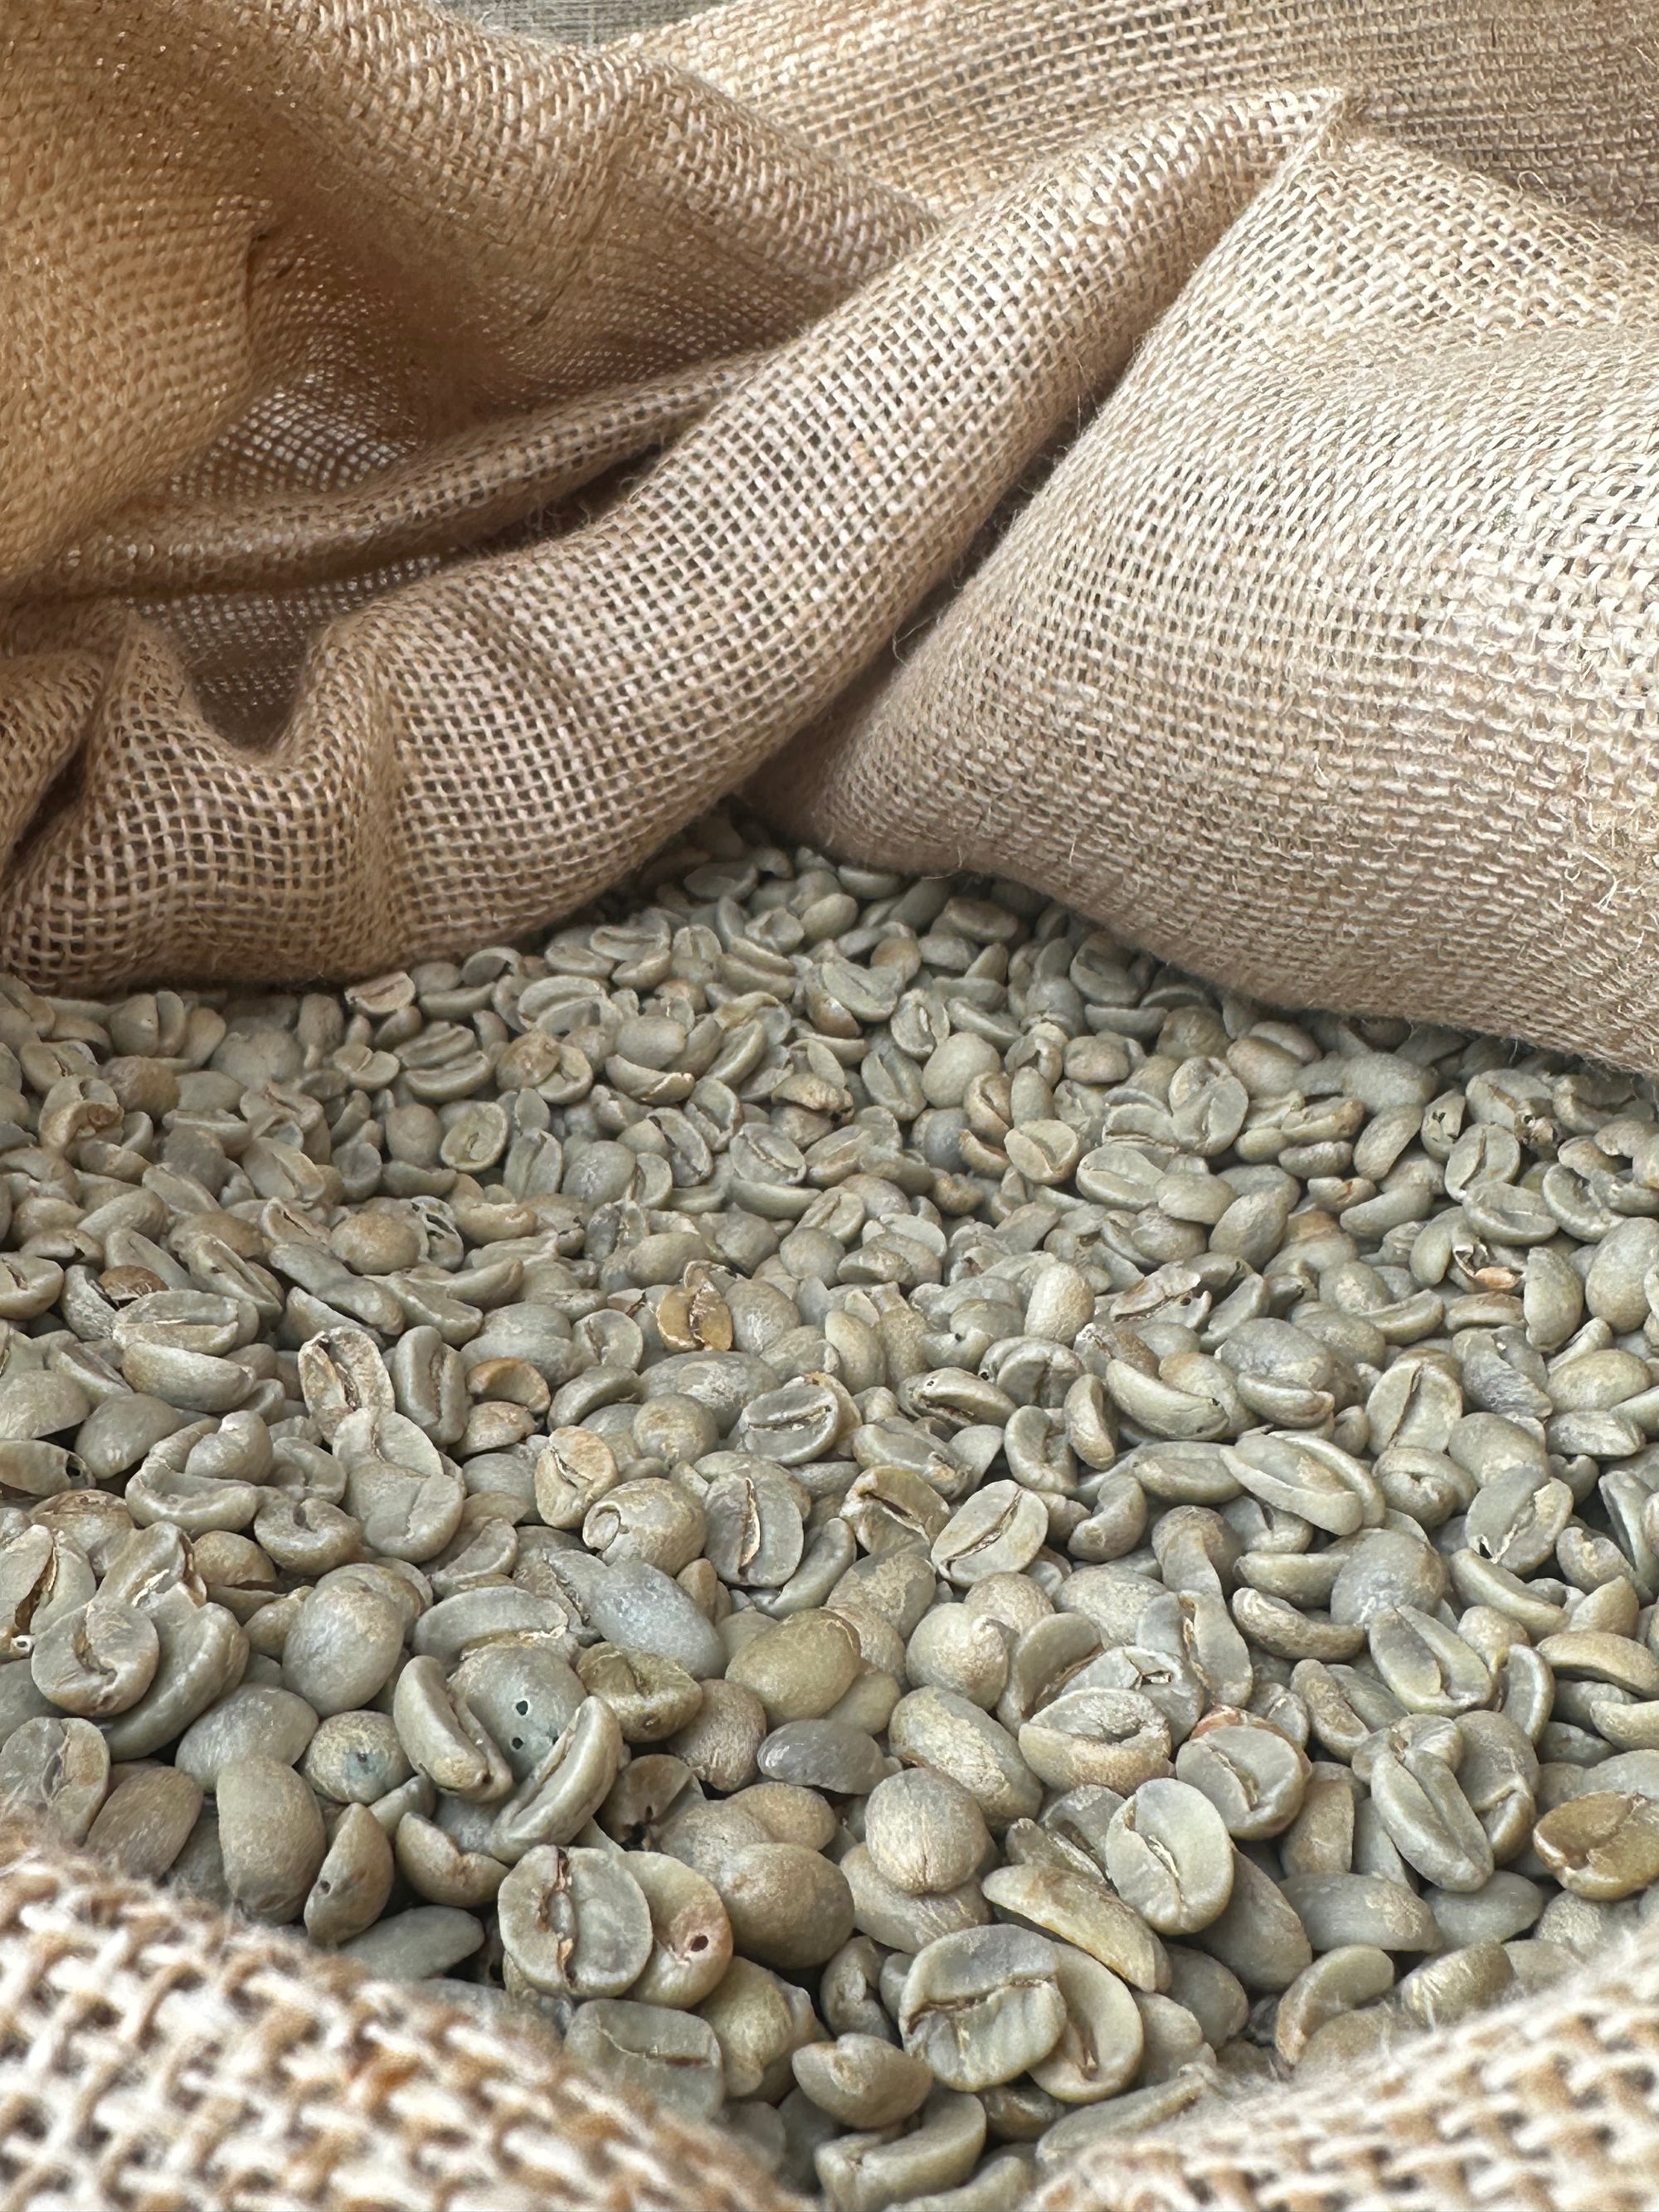 What Is The Difference Between Green Coffee And Roasted Coffee?